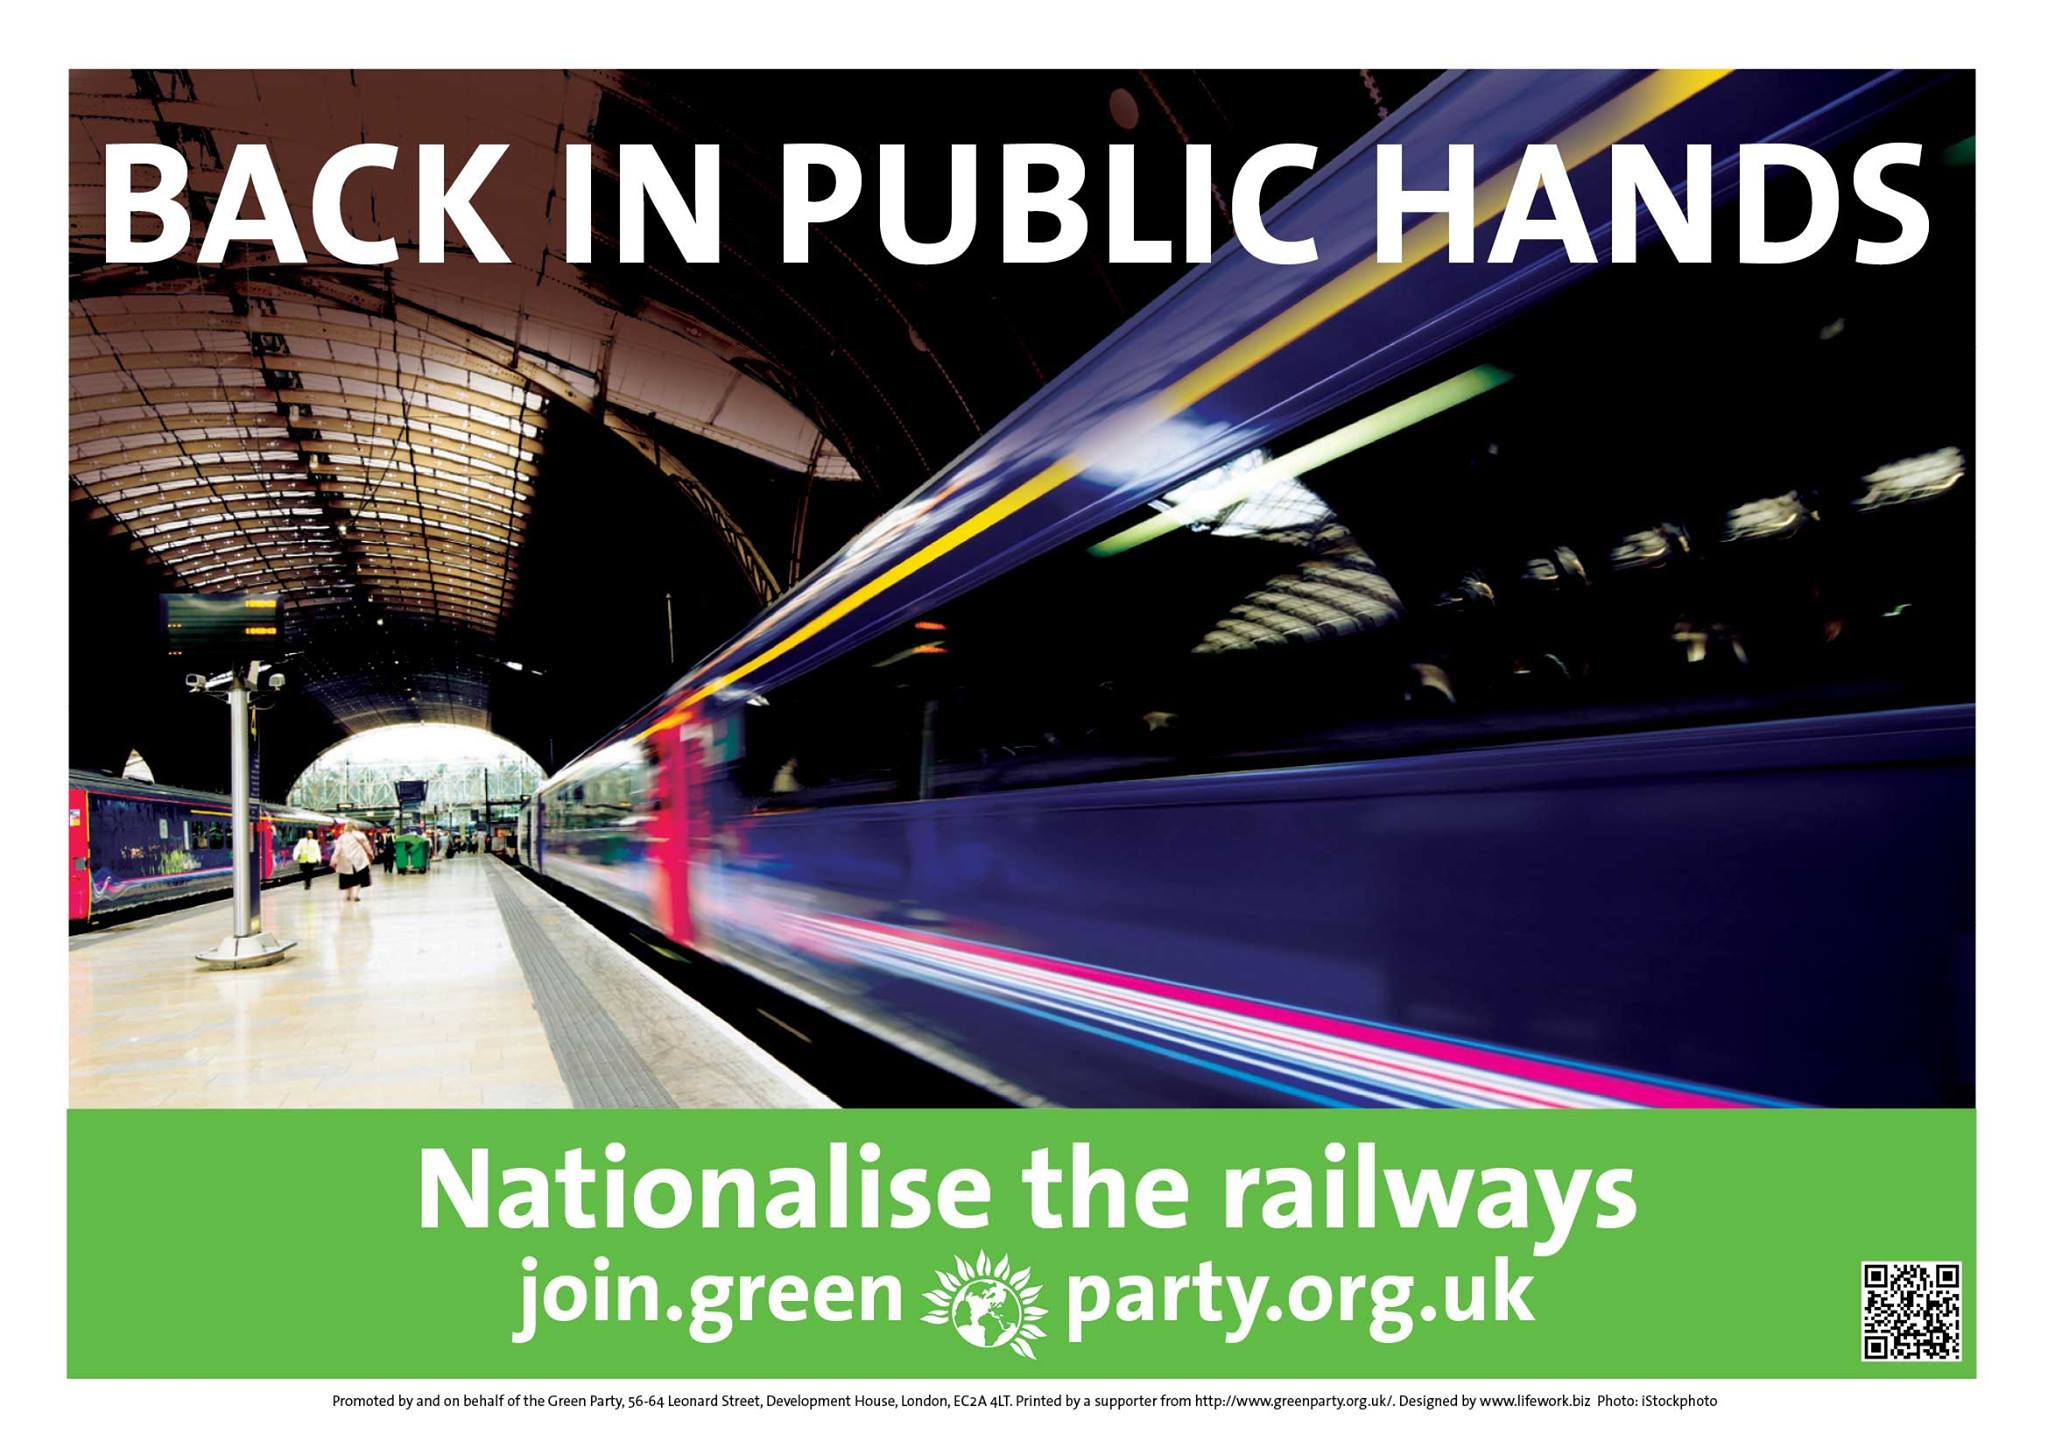 Nationalise the railways http://greenparty.org.uk/policies.html